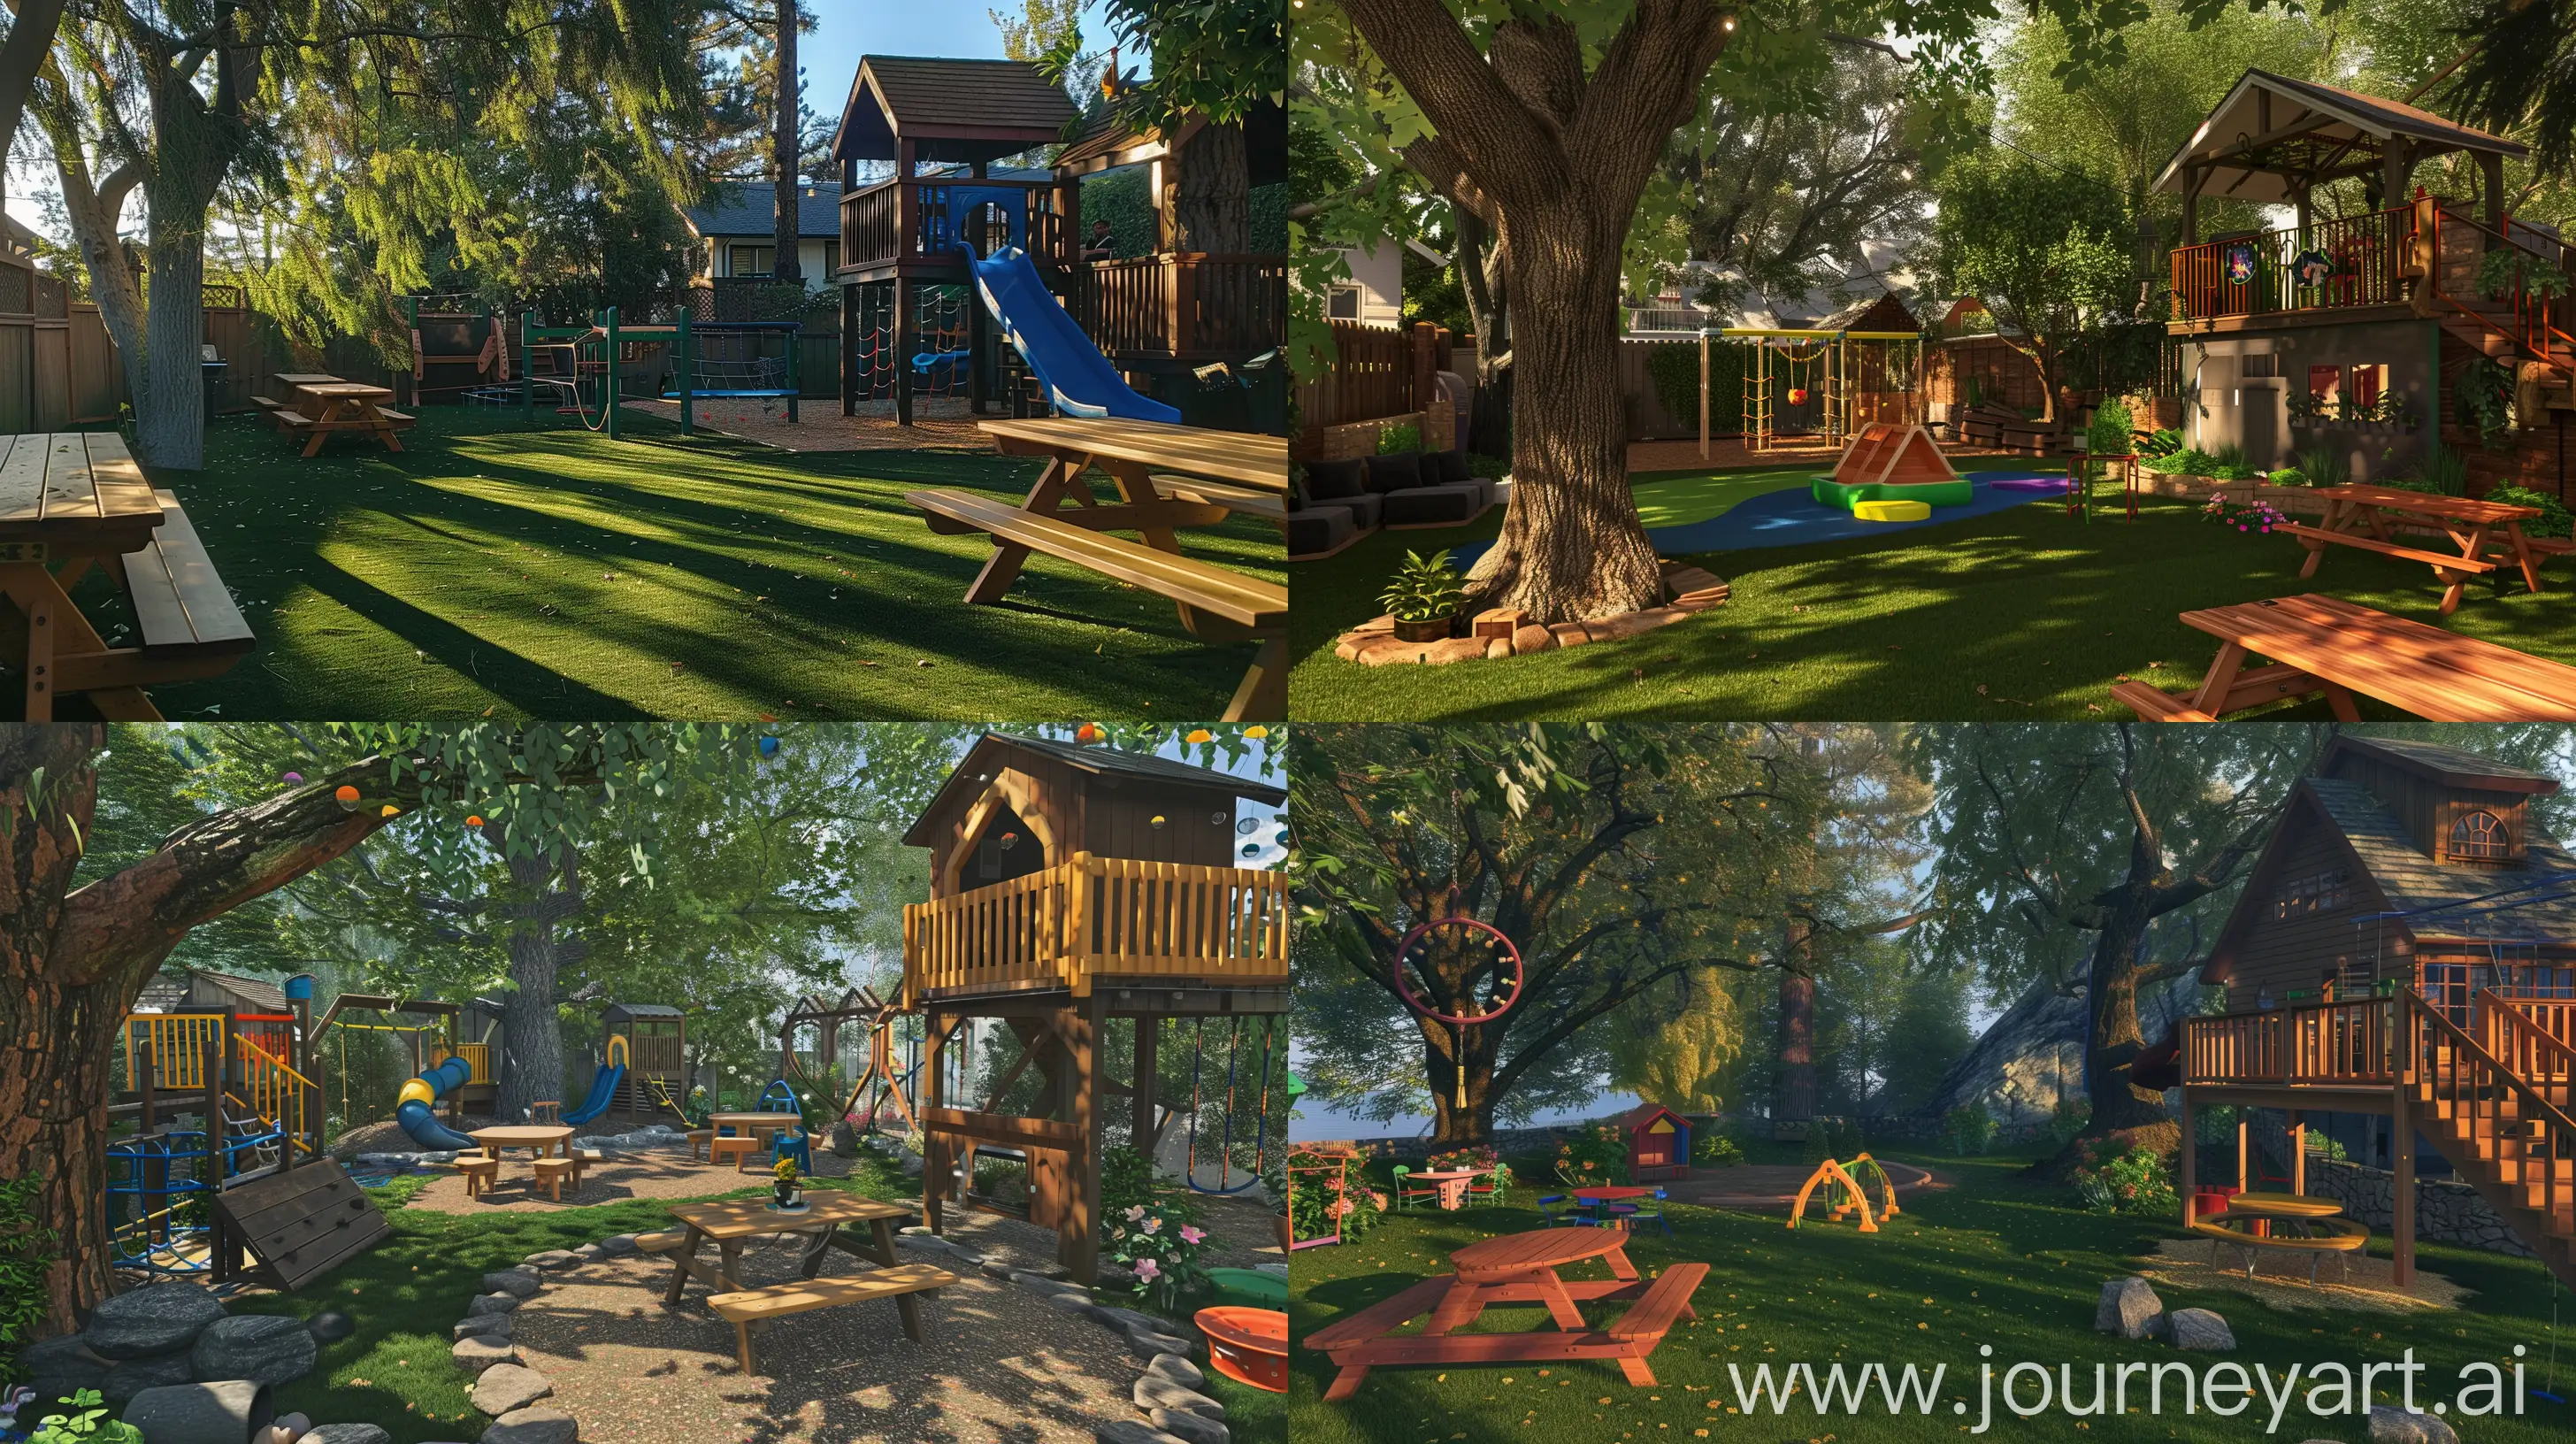 Family Fun Haven: Backyard with Playground Area, Picnic Tables, and a Treehouse Retreat. --ar 16:9